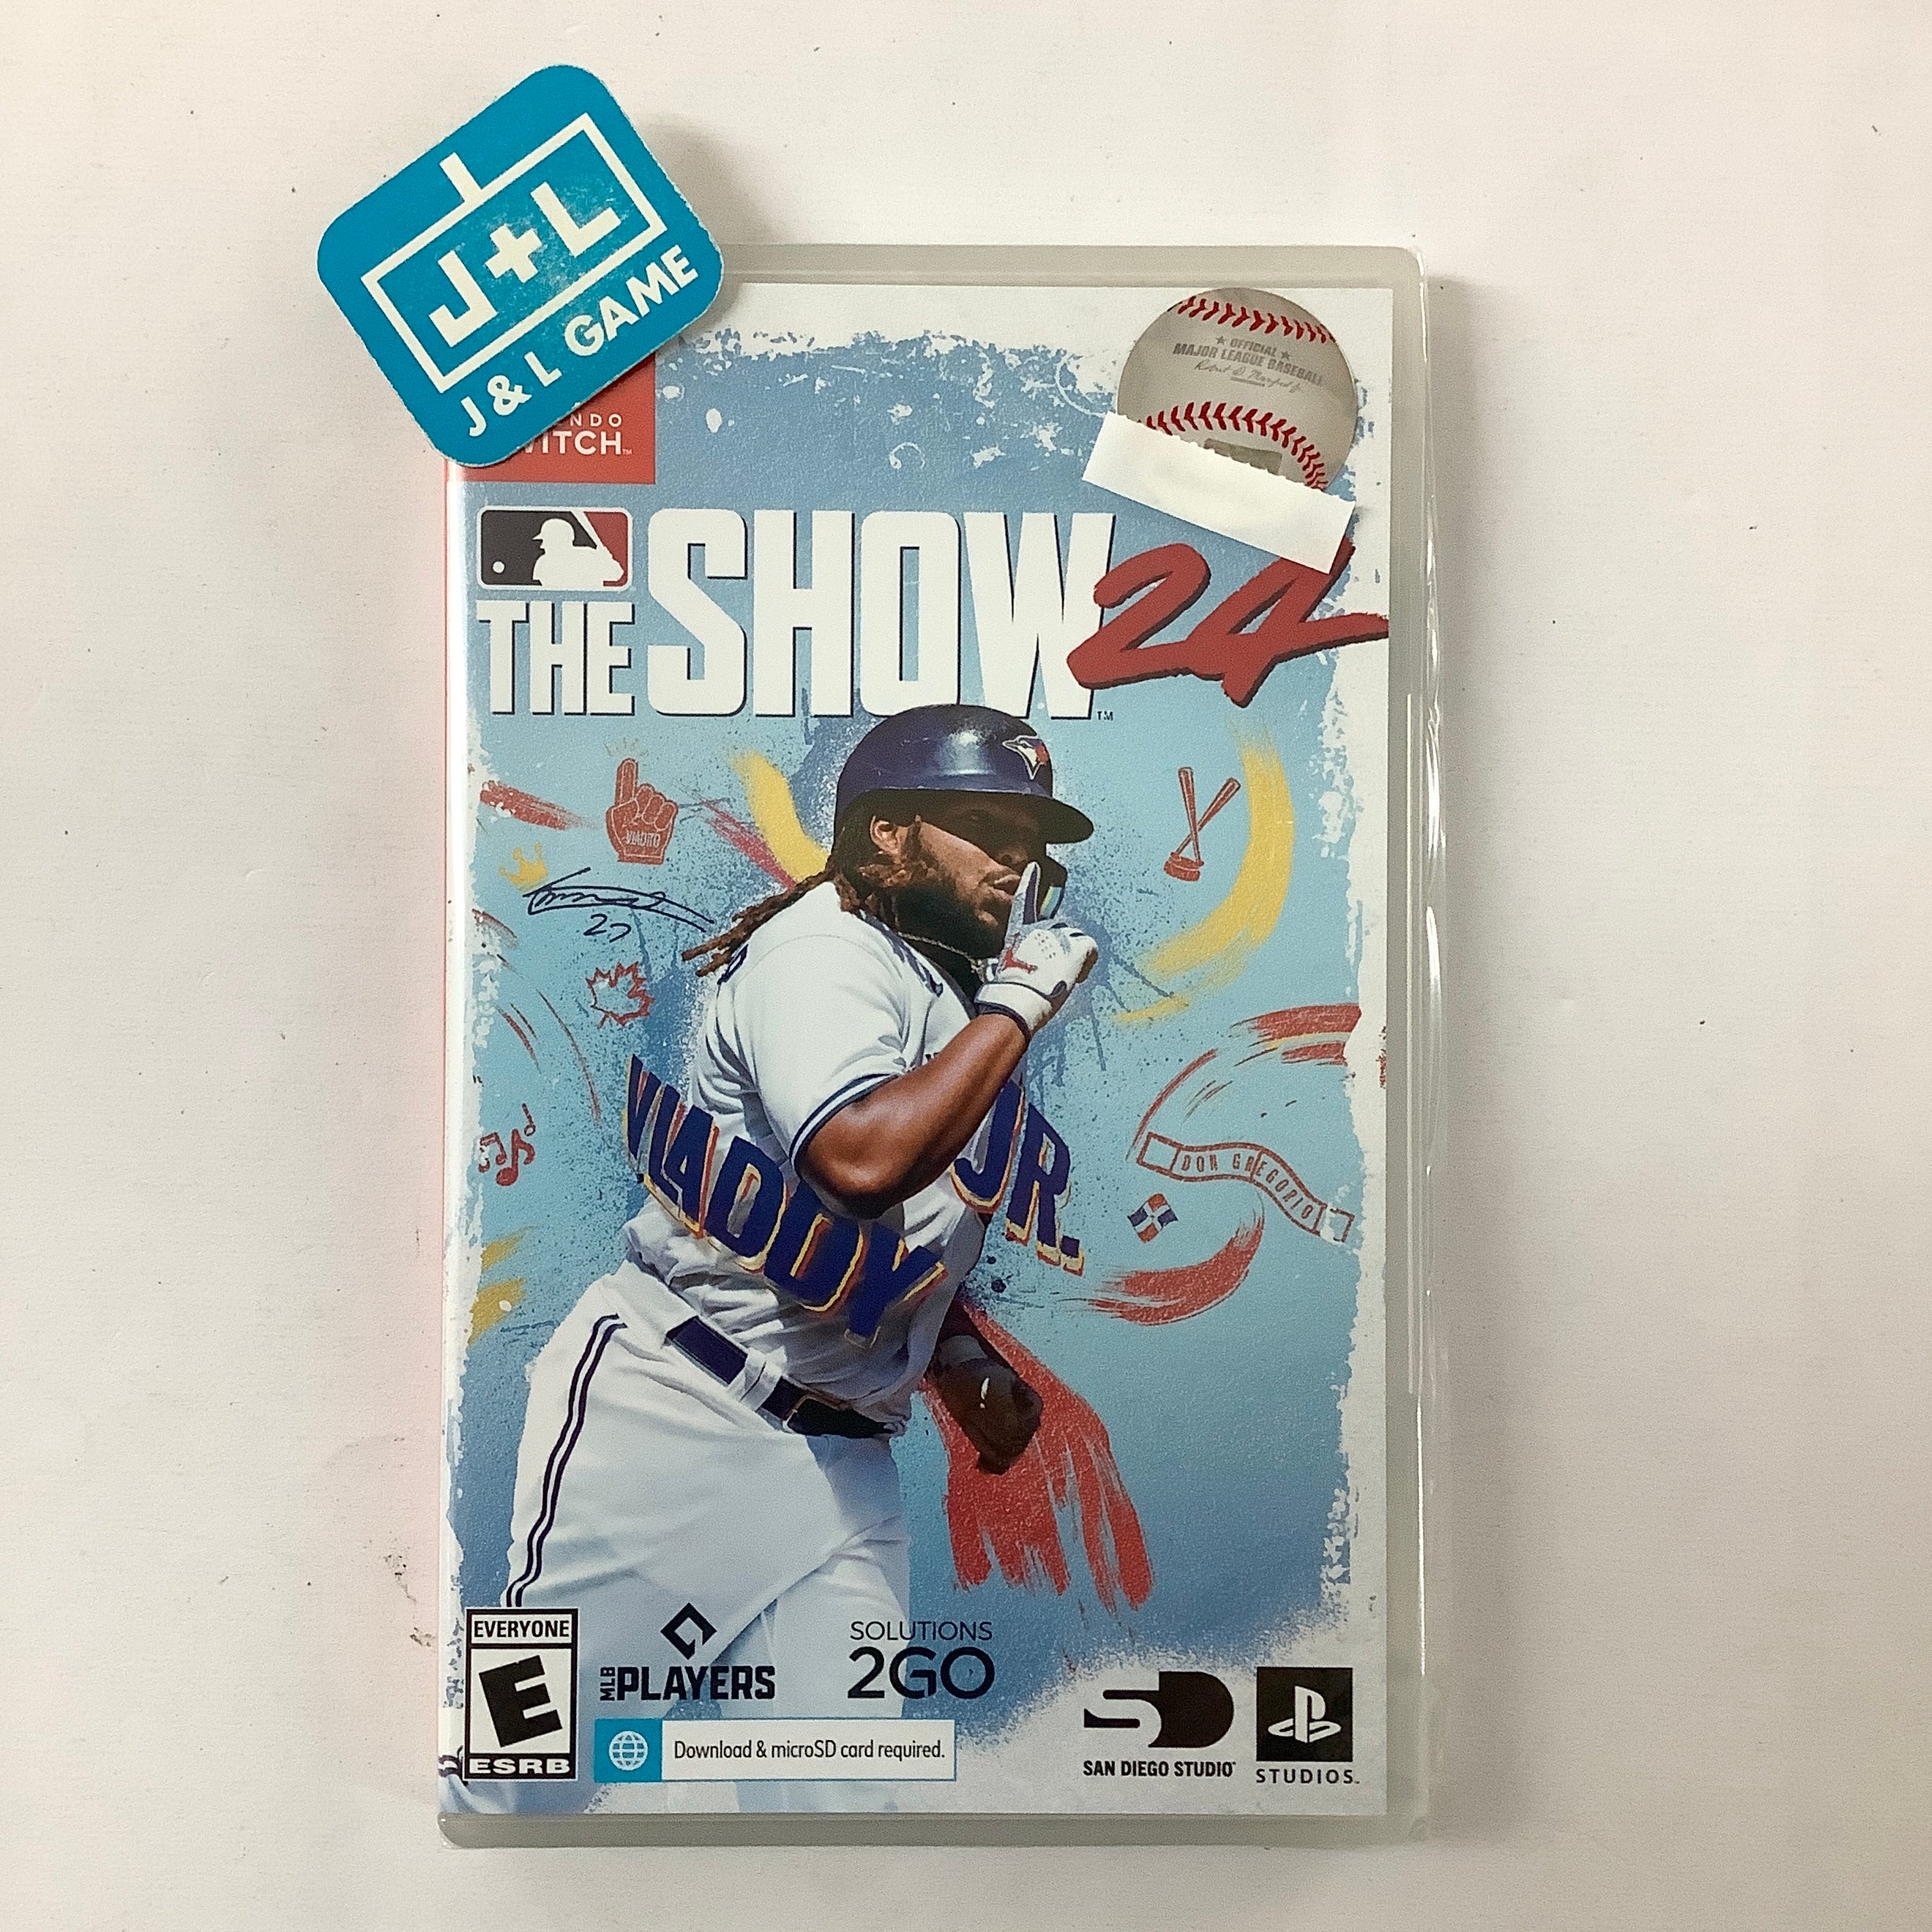 MLB The Show 24 - (NSW) Nintendo Switch Video Games MLB AM   